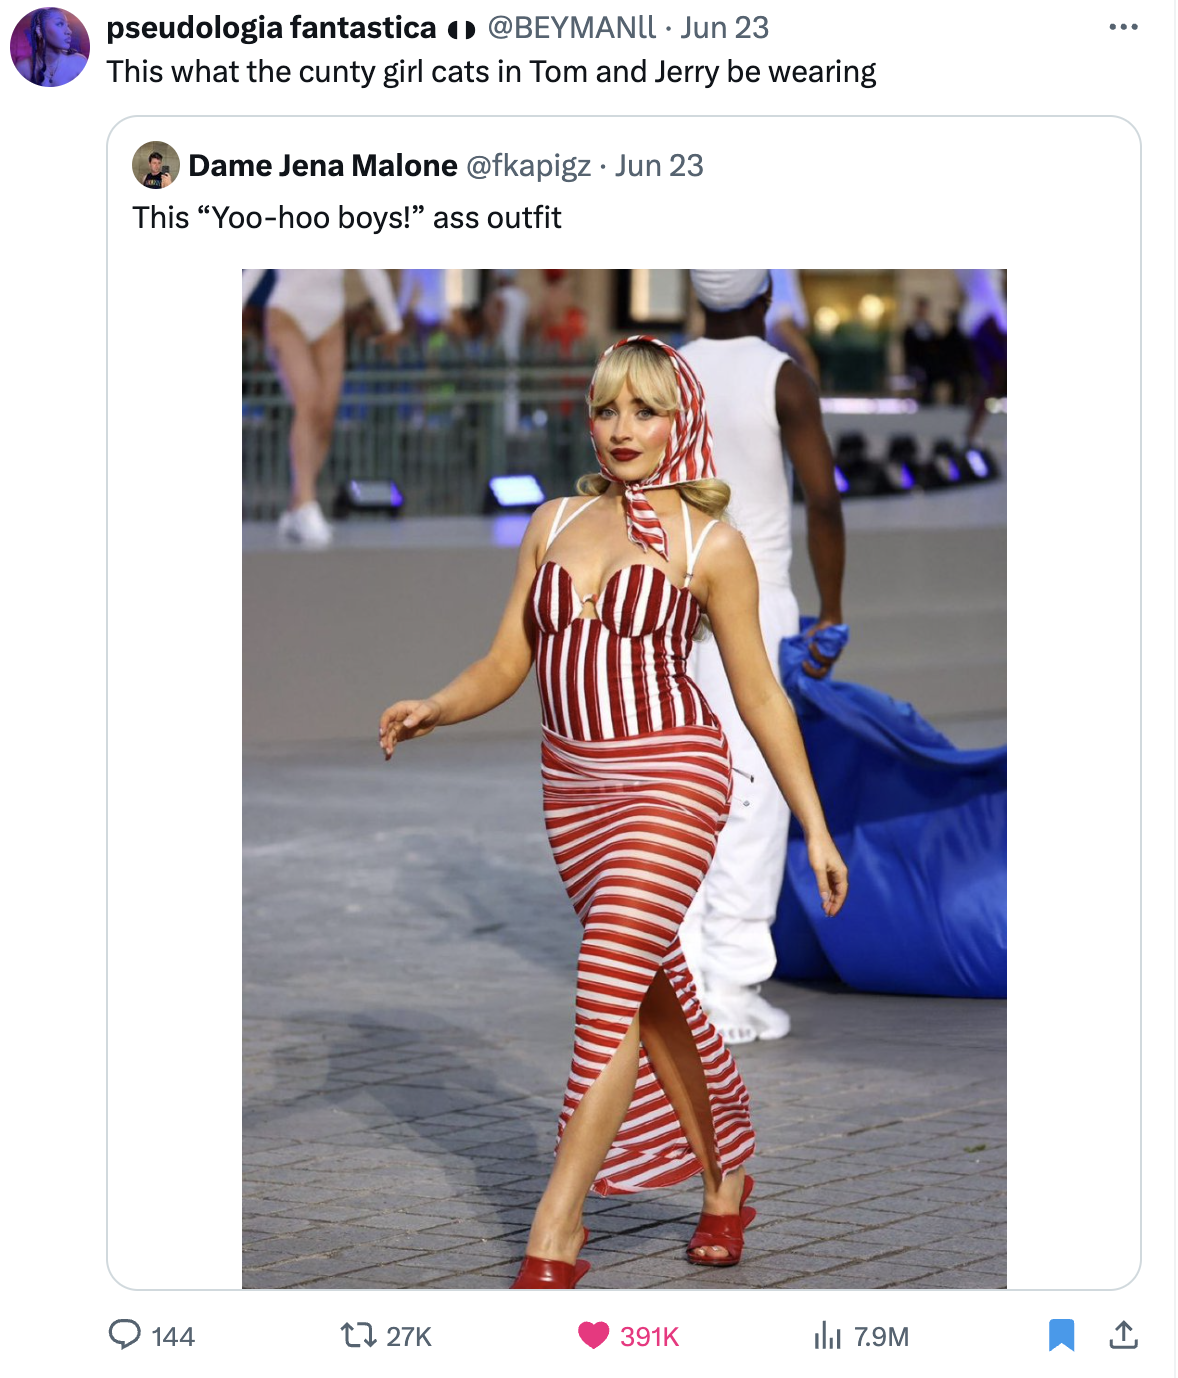 Jena Malone walks a runway in a form-fitting, striped red and white outfit, including a headscarf. The tweet text says: &quot;This &#x27;Yoo-hoo boys!&#x27; ass outfit.&quot;